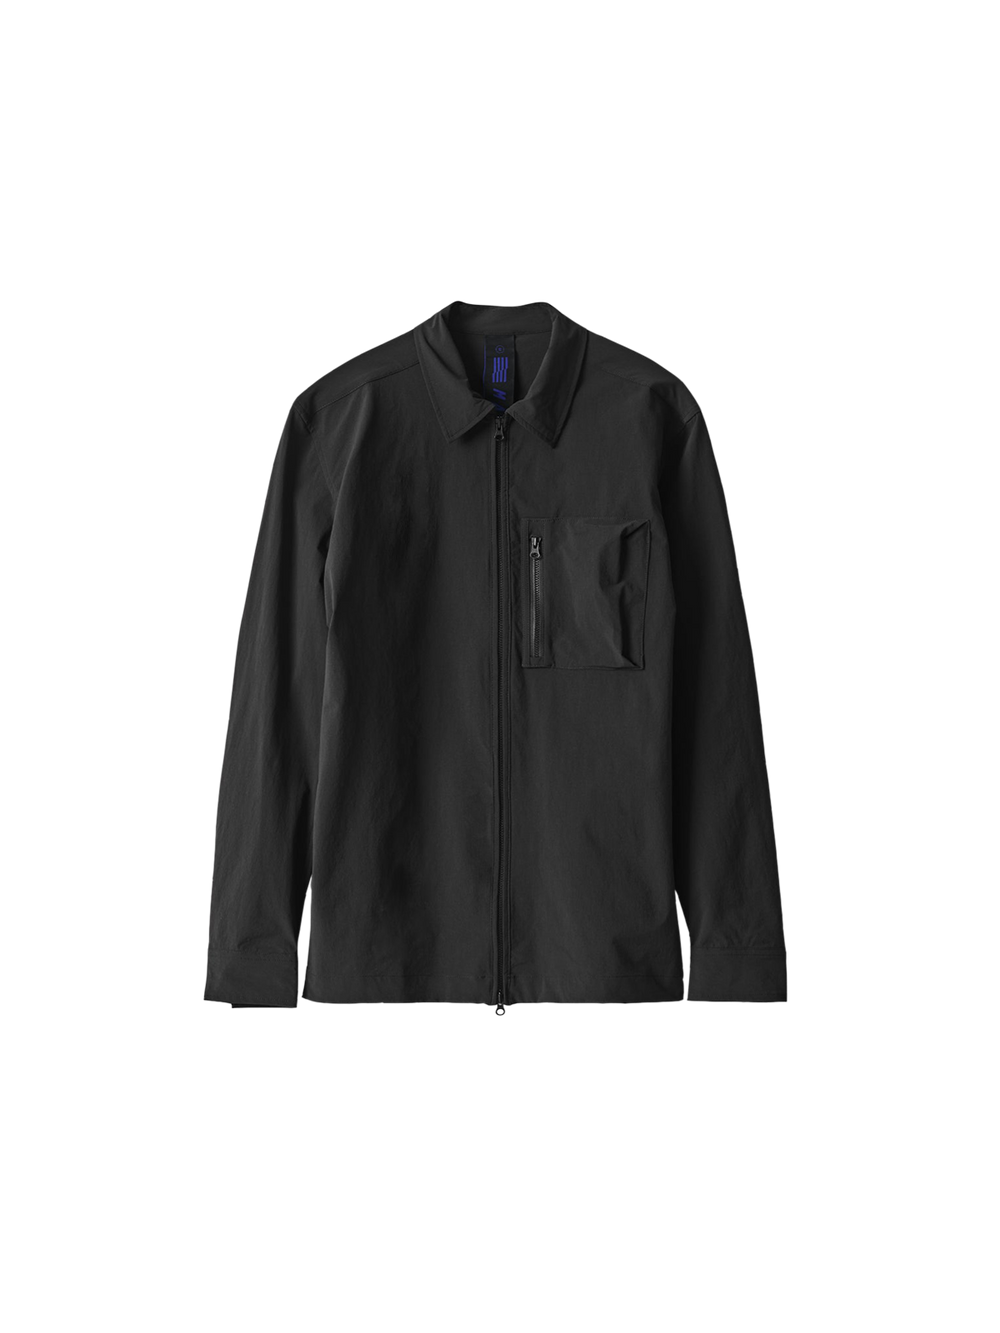 Product Image for Motion Shirt